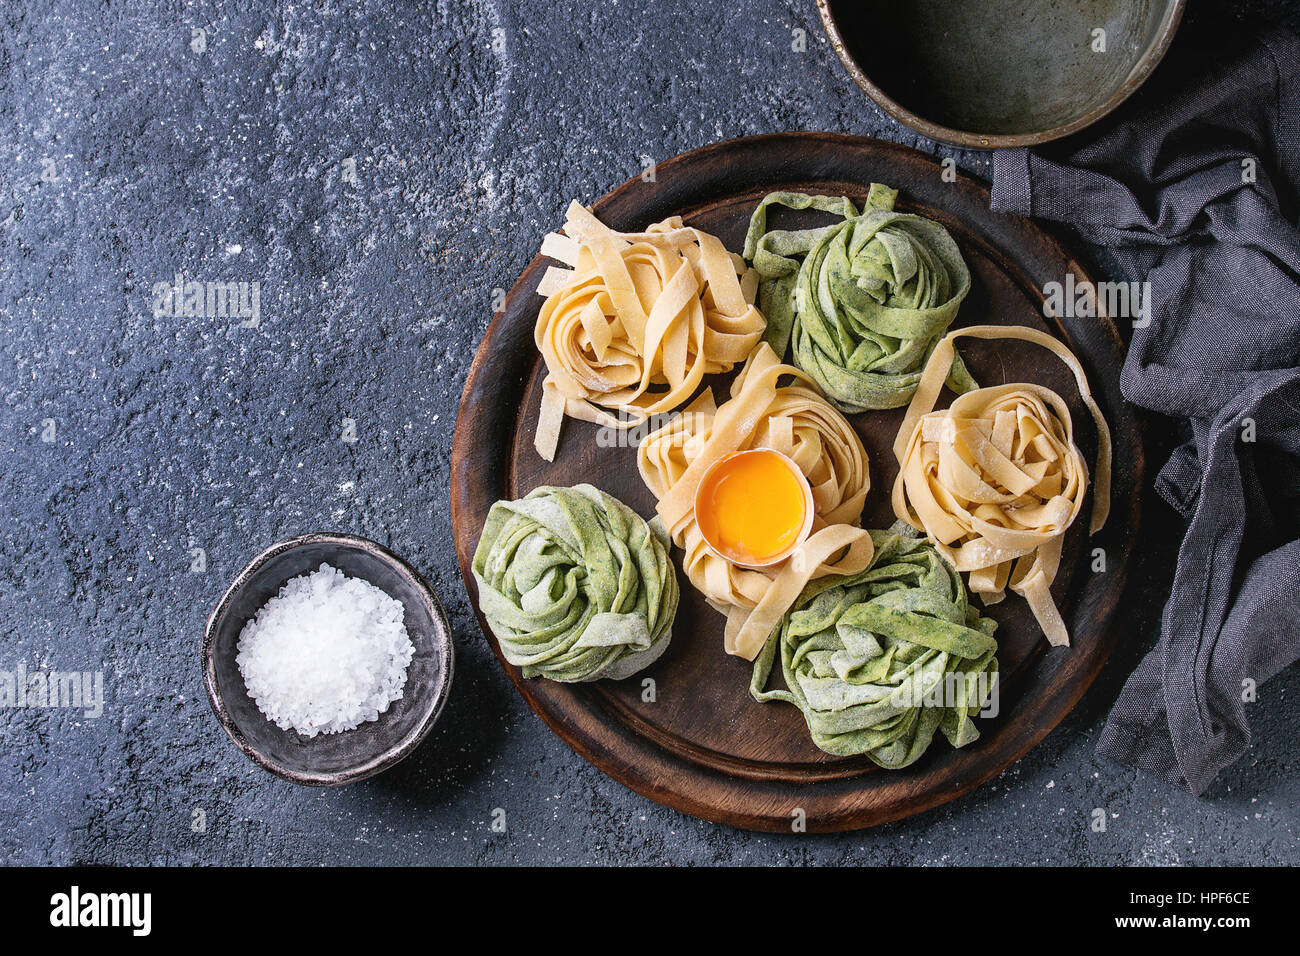 Variety of raw uncooked homemade pasta tagliatelle green spinach and traditional yellow with egg yolk ready to cook with salt on wood cutting board ov Stock Photo